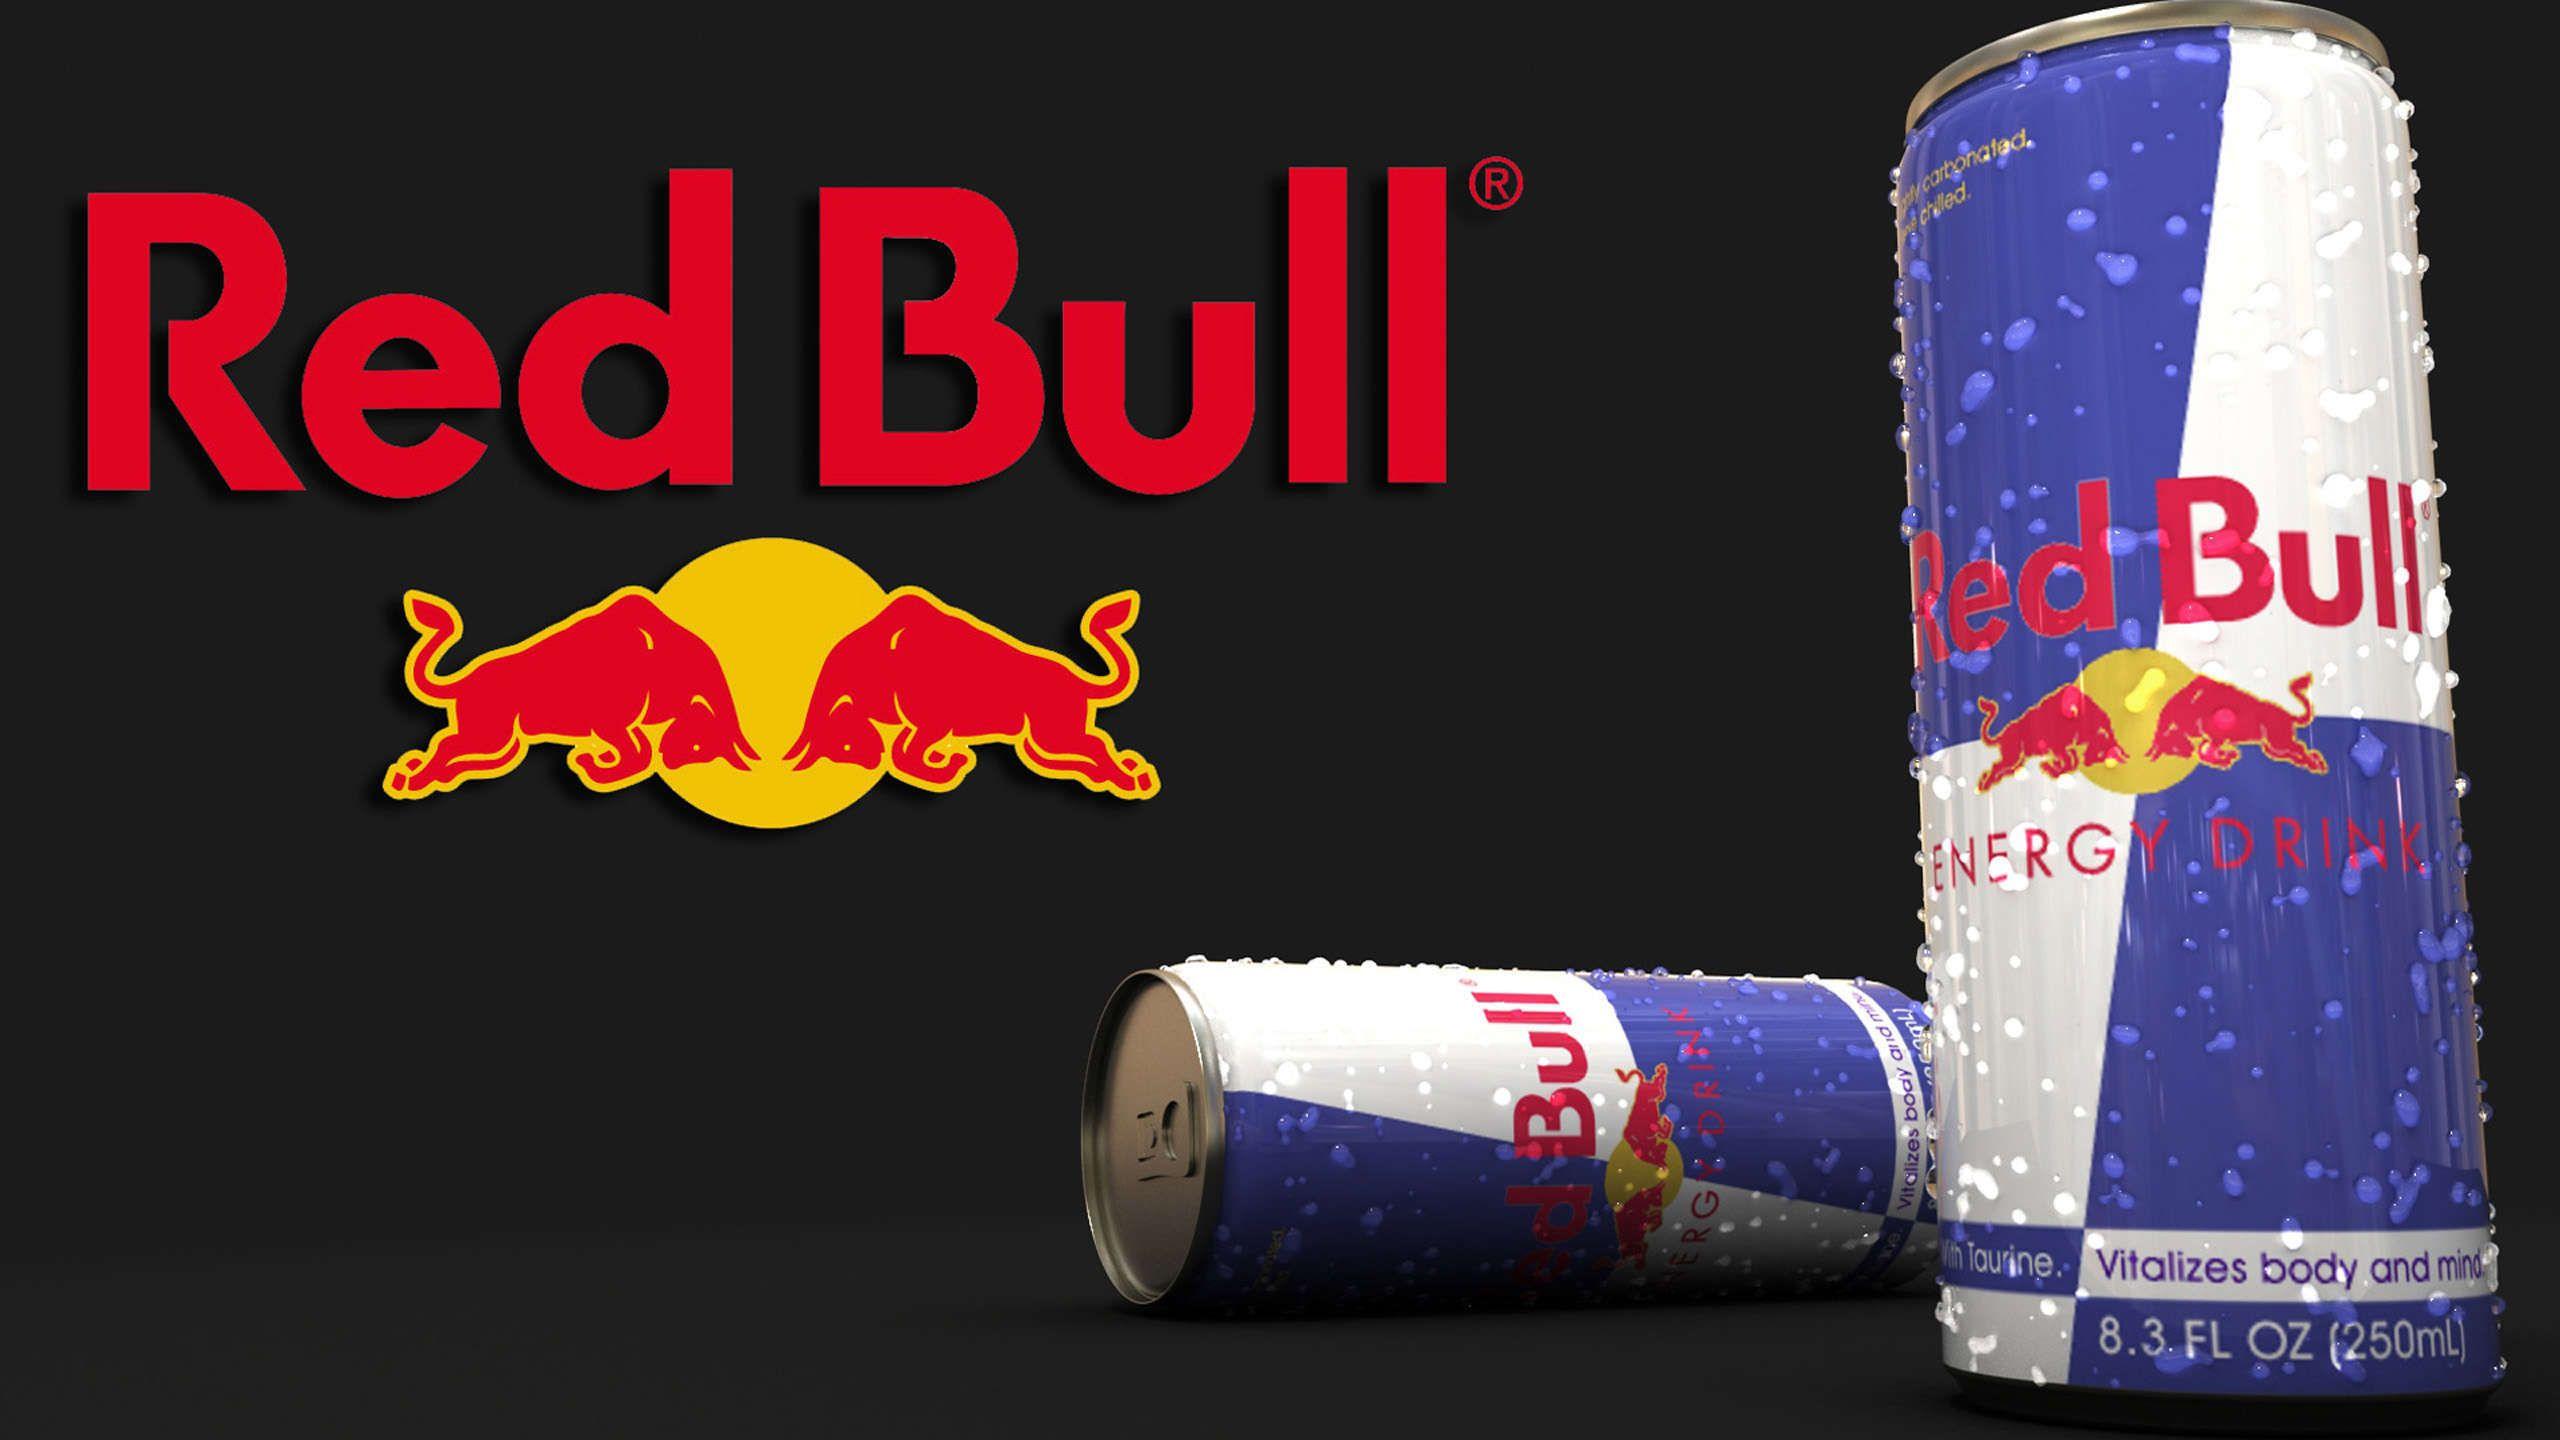 of Red Bull Widescreen Wallpaper: 2560x1440 for desktop and mobile